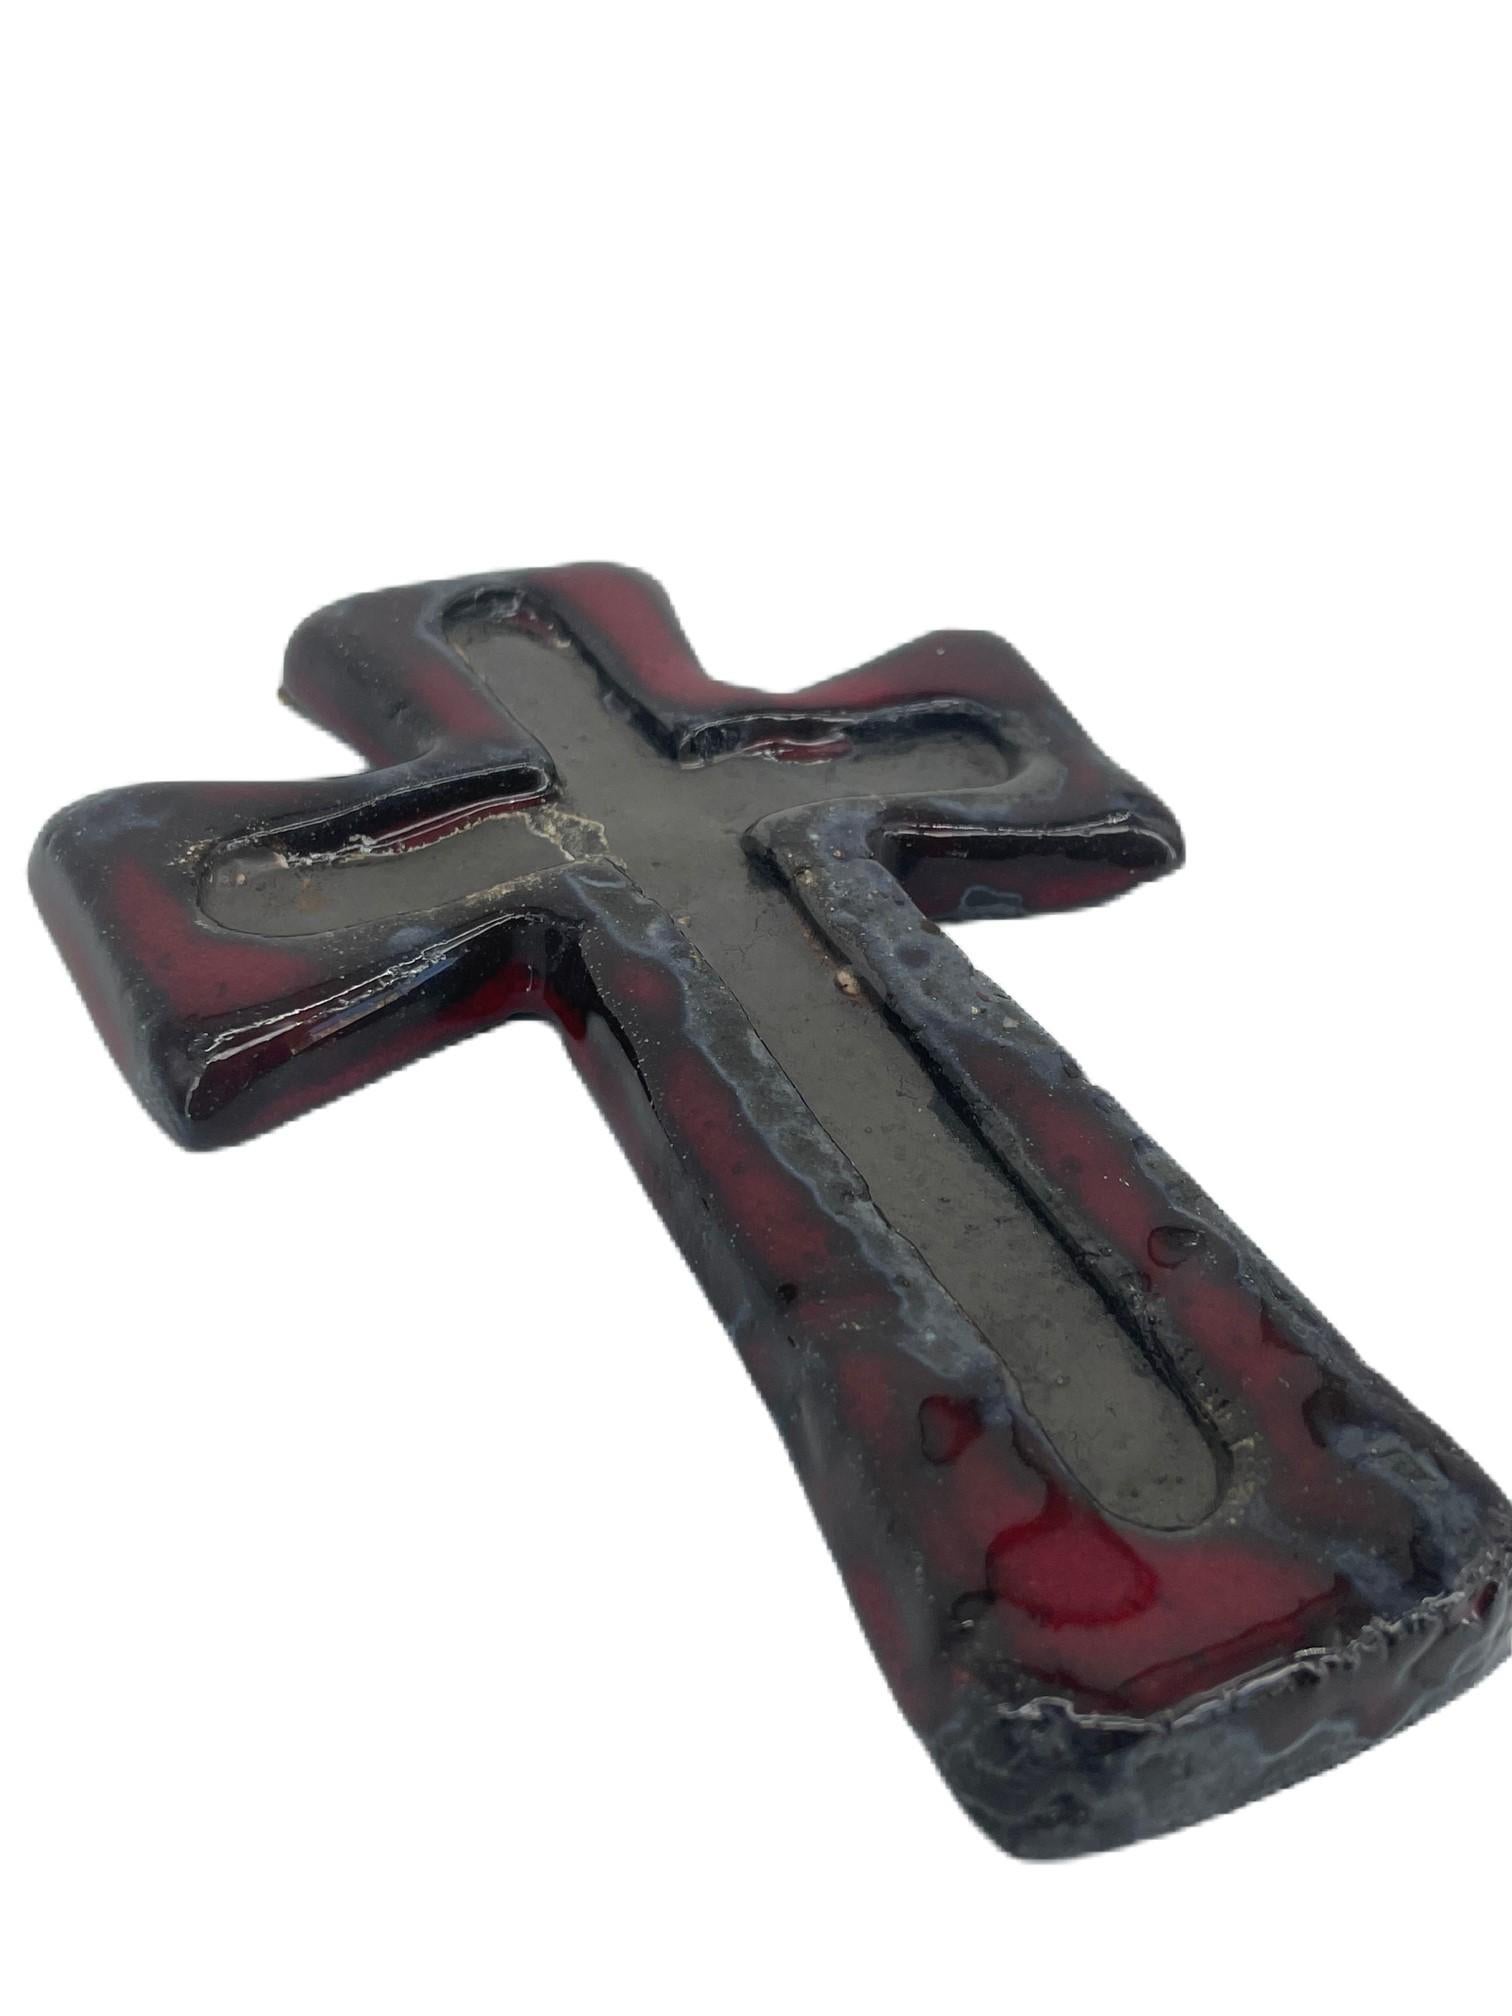 Vintage Fat lava crucifix in red, black and grey, wall hanging. 1970s ceramic cross. Religion. Religious artifact.

West German Art Pottery is essentially a term describing the time period of 1949-1990 and became the early way to describe the